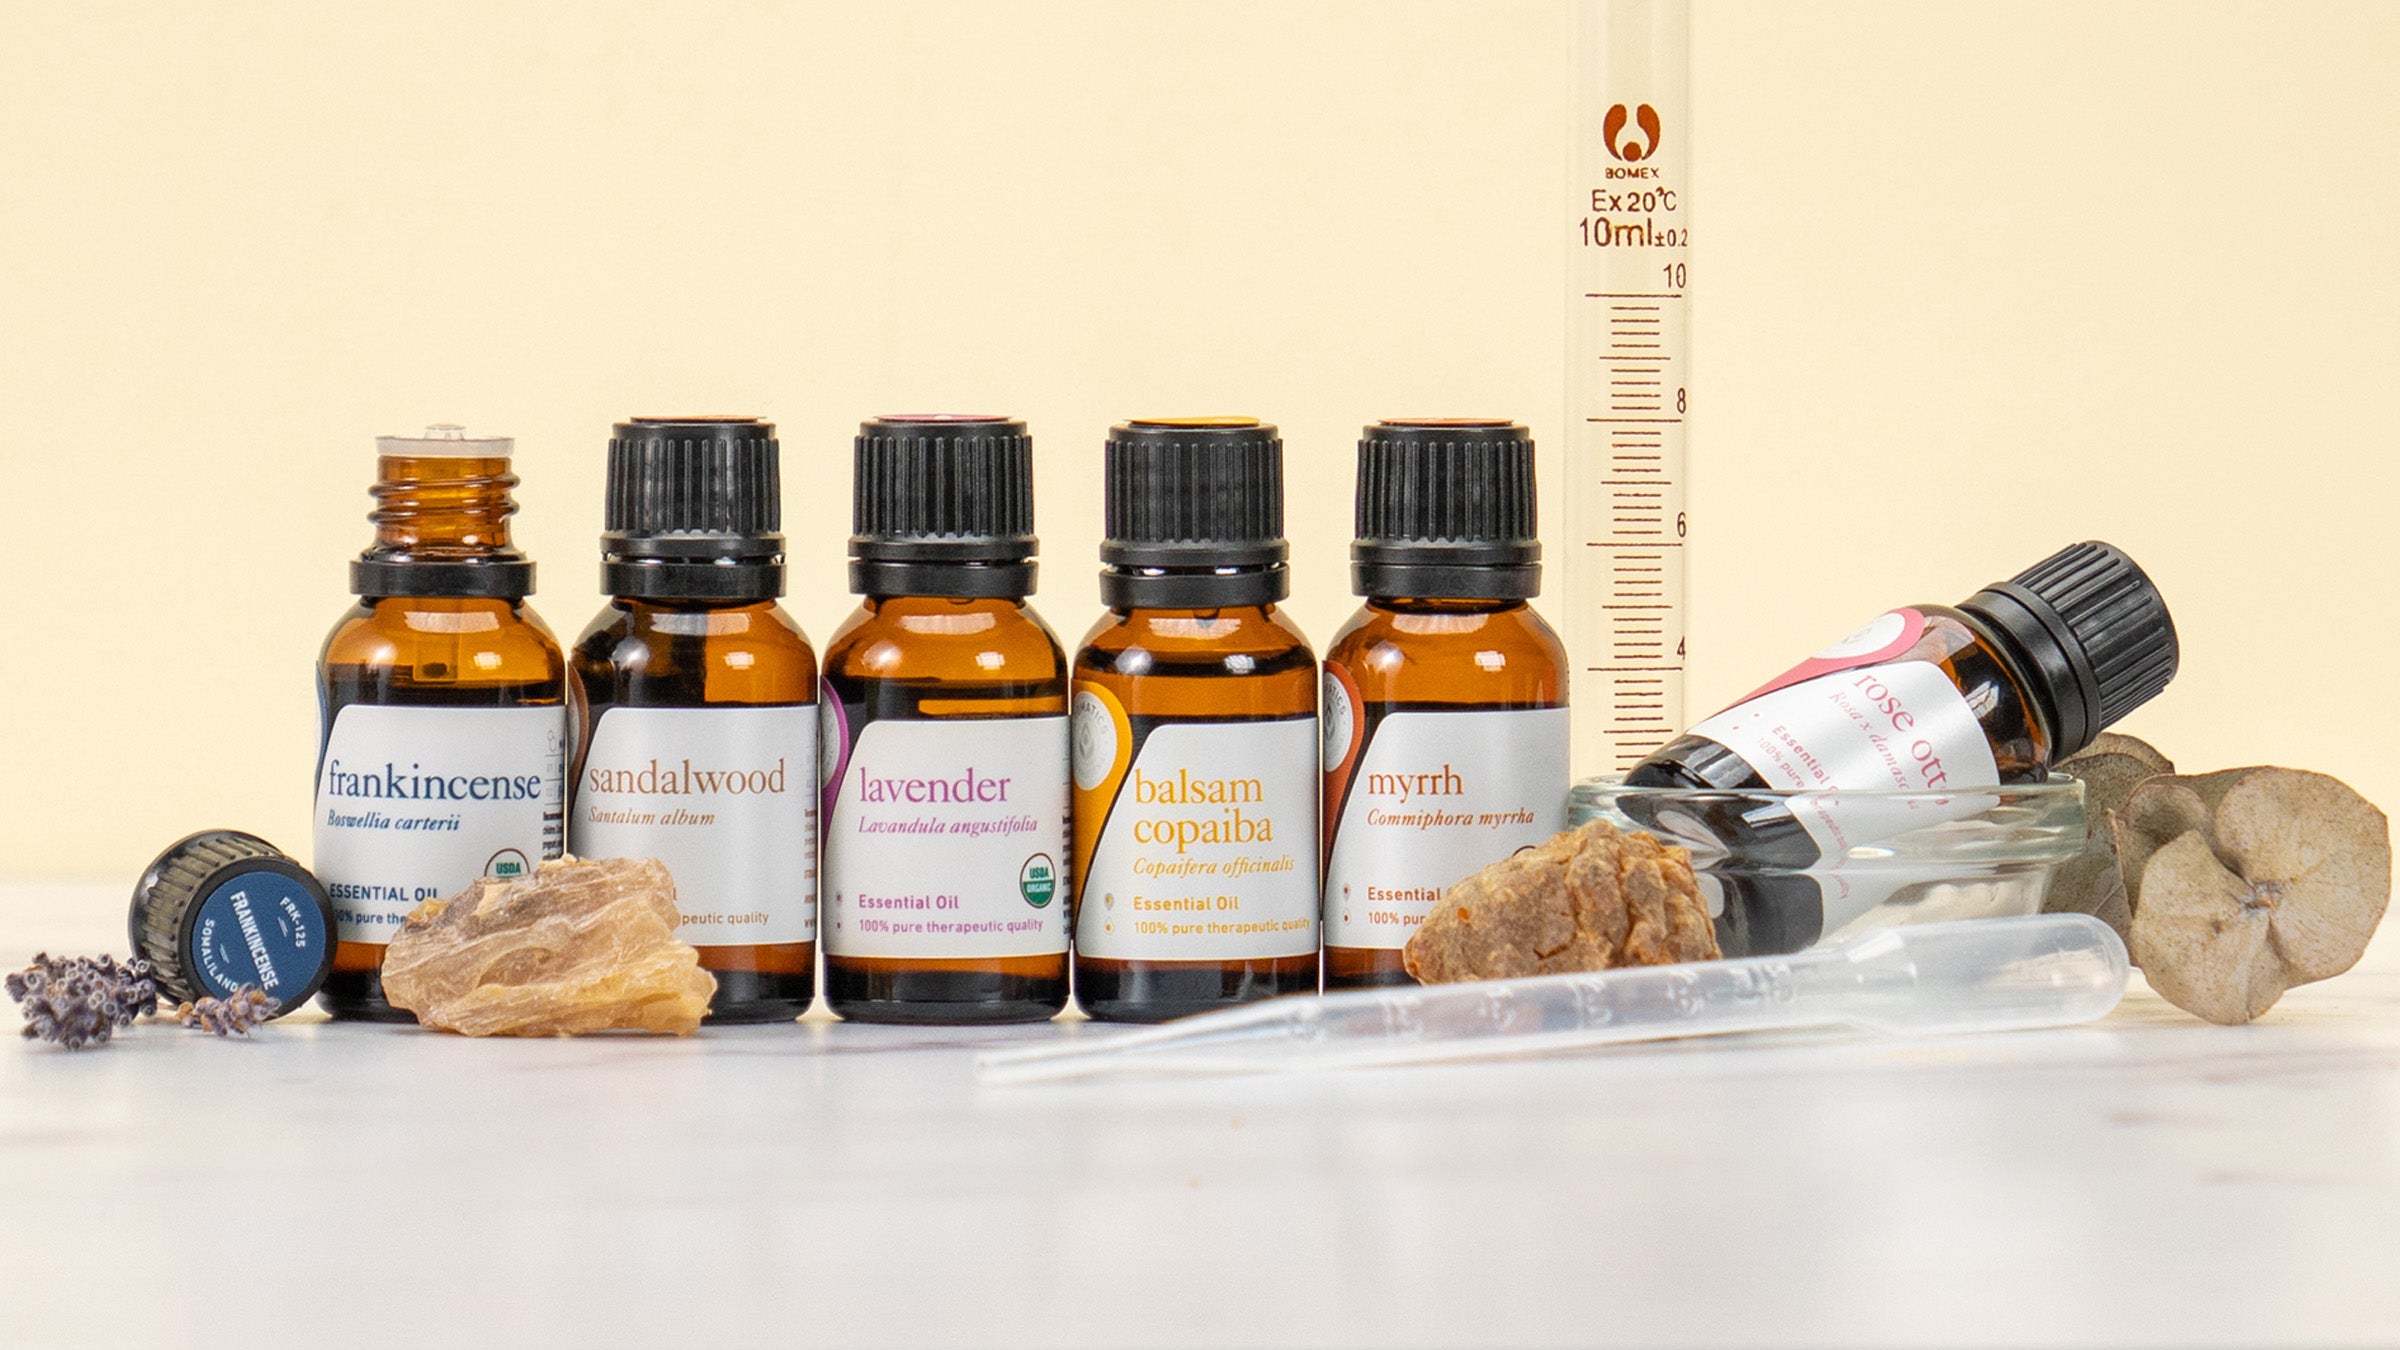 Essential Oils for Winters - Kusharomaexports